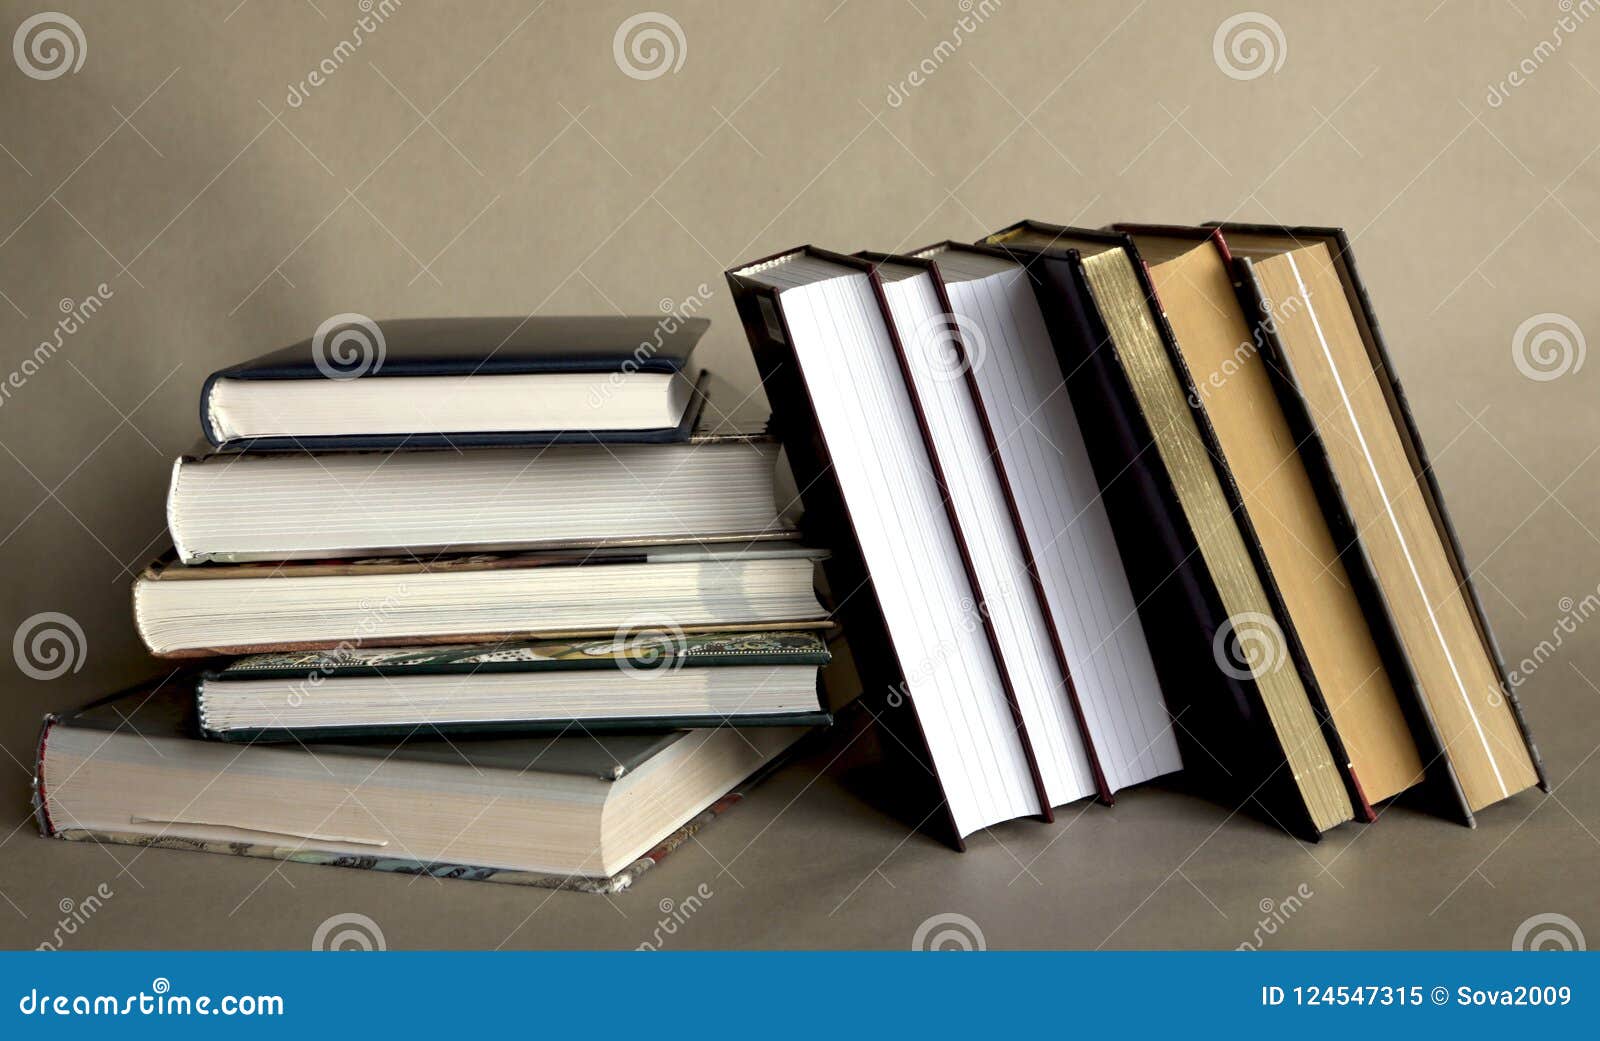 Stack of Books in the Workplace Stock Image - Image of reader, literate